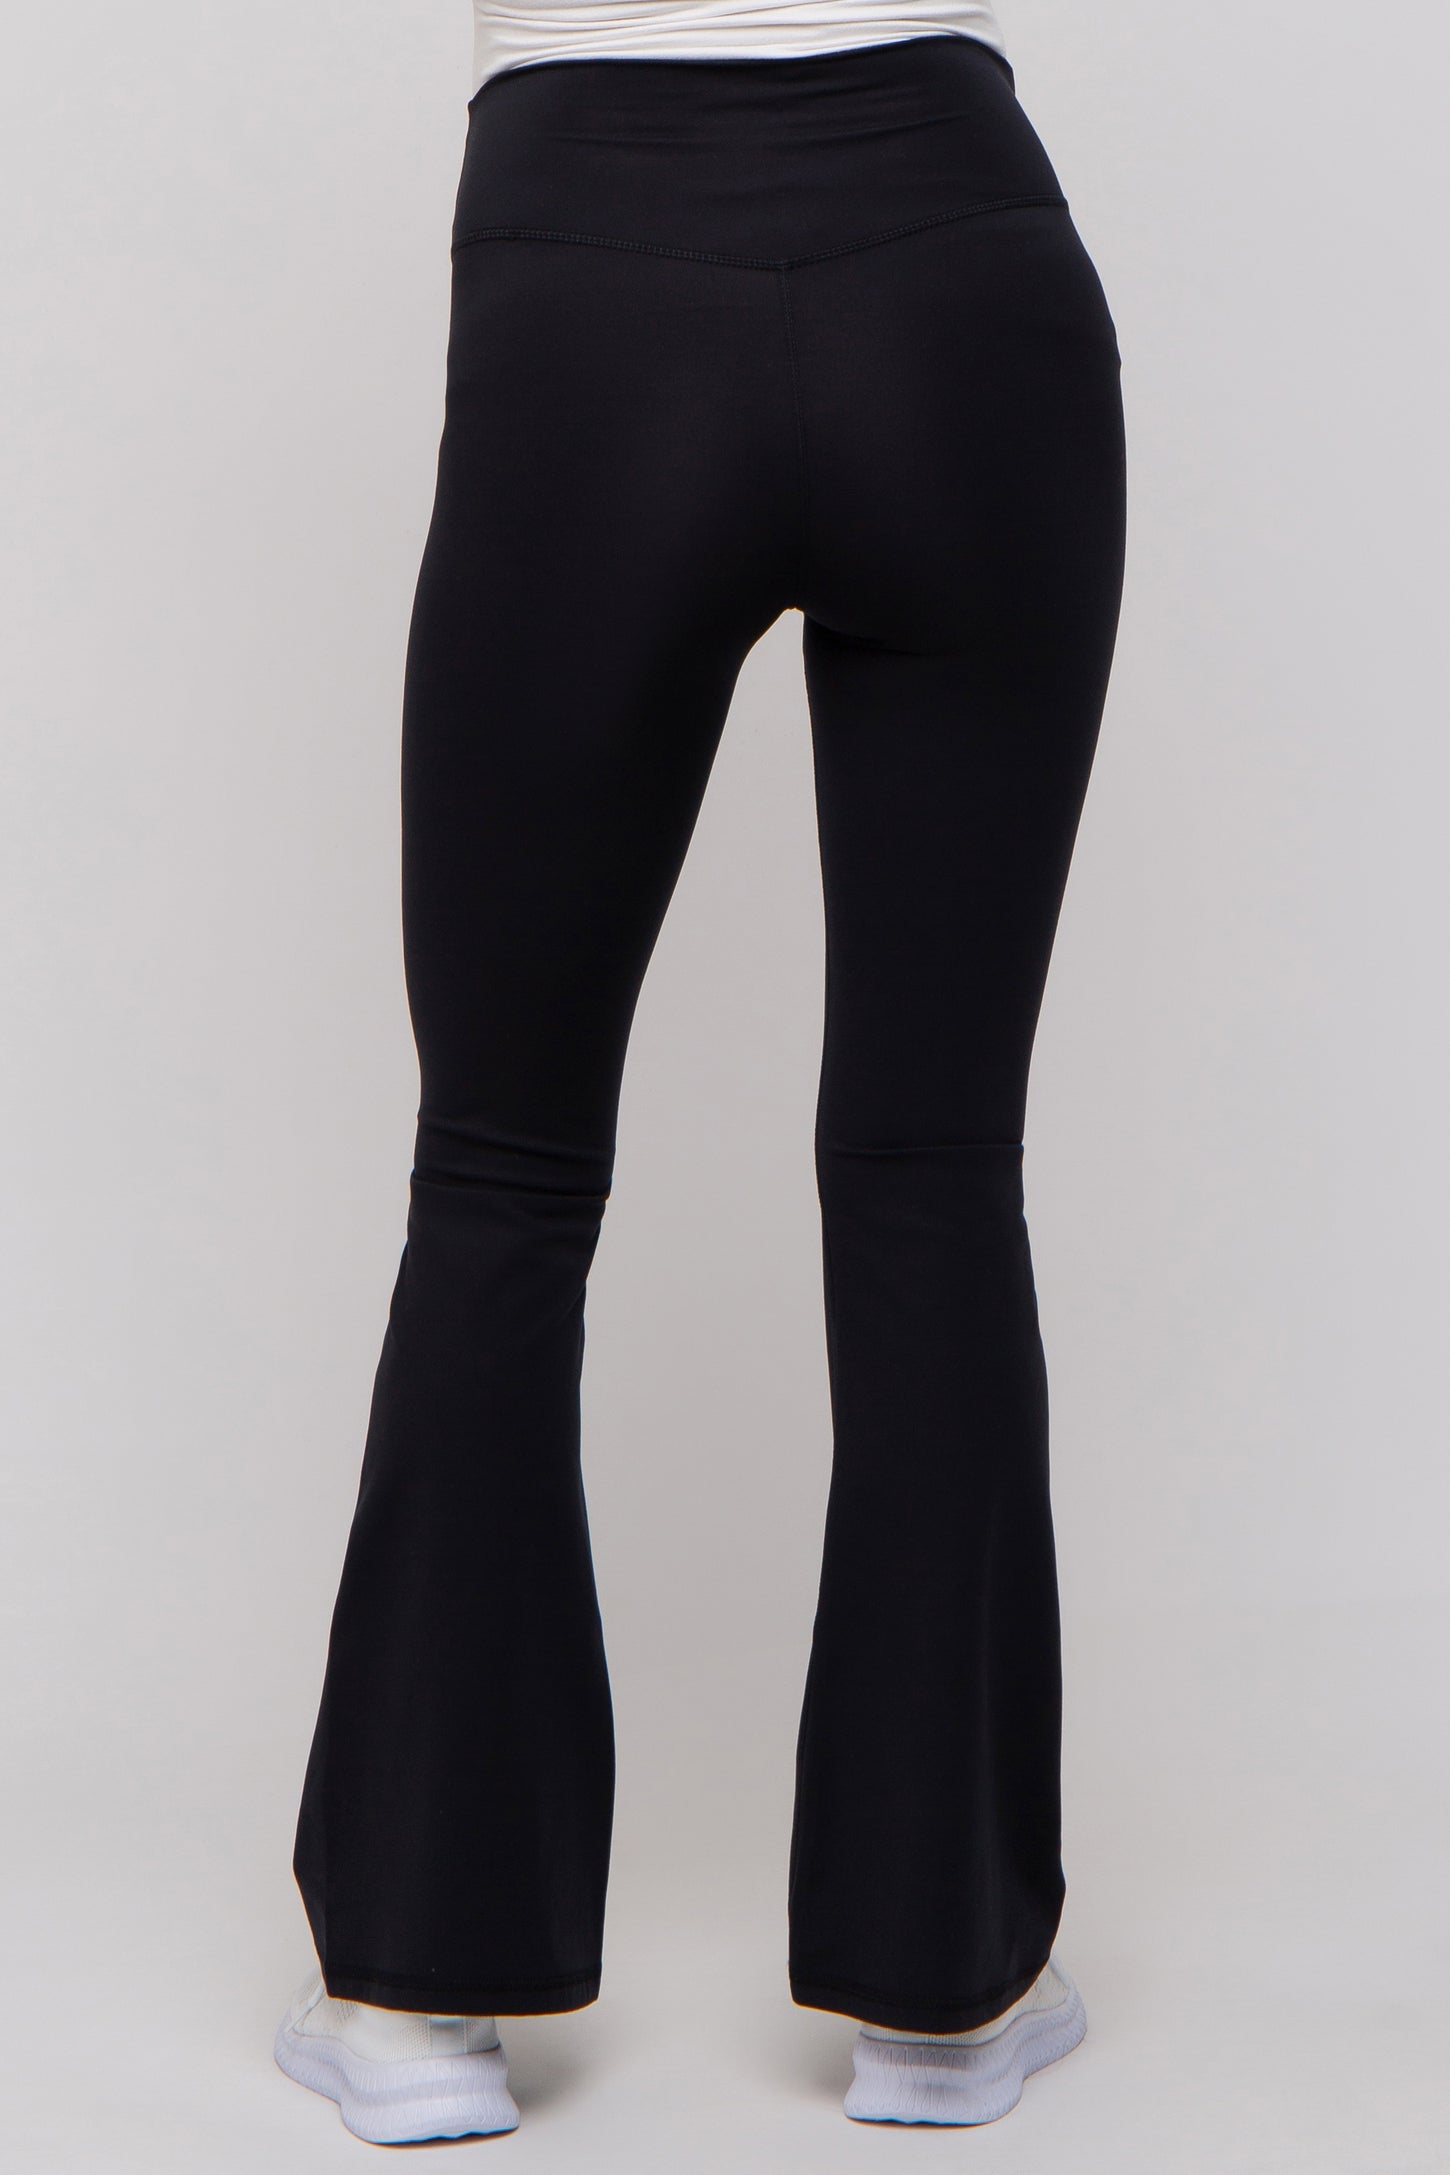 Black Front Ruched Maternity Leggings– PinkBlush